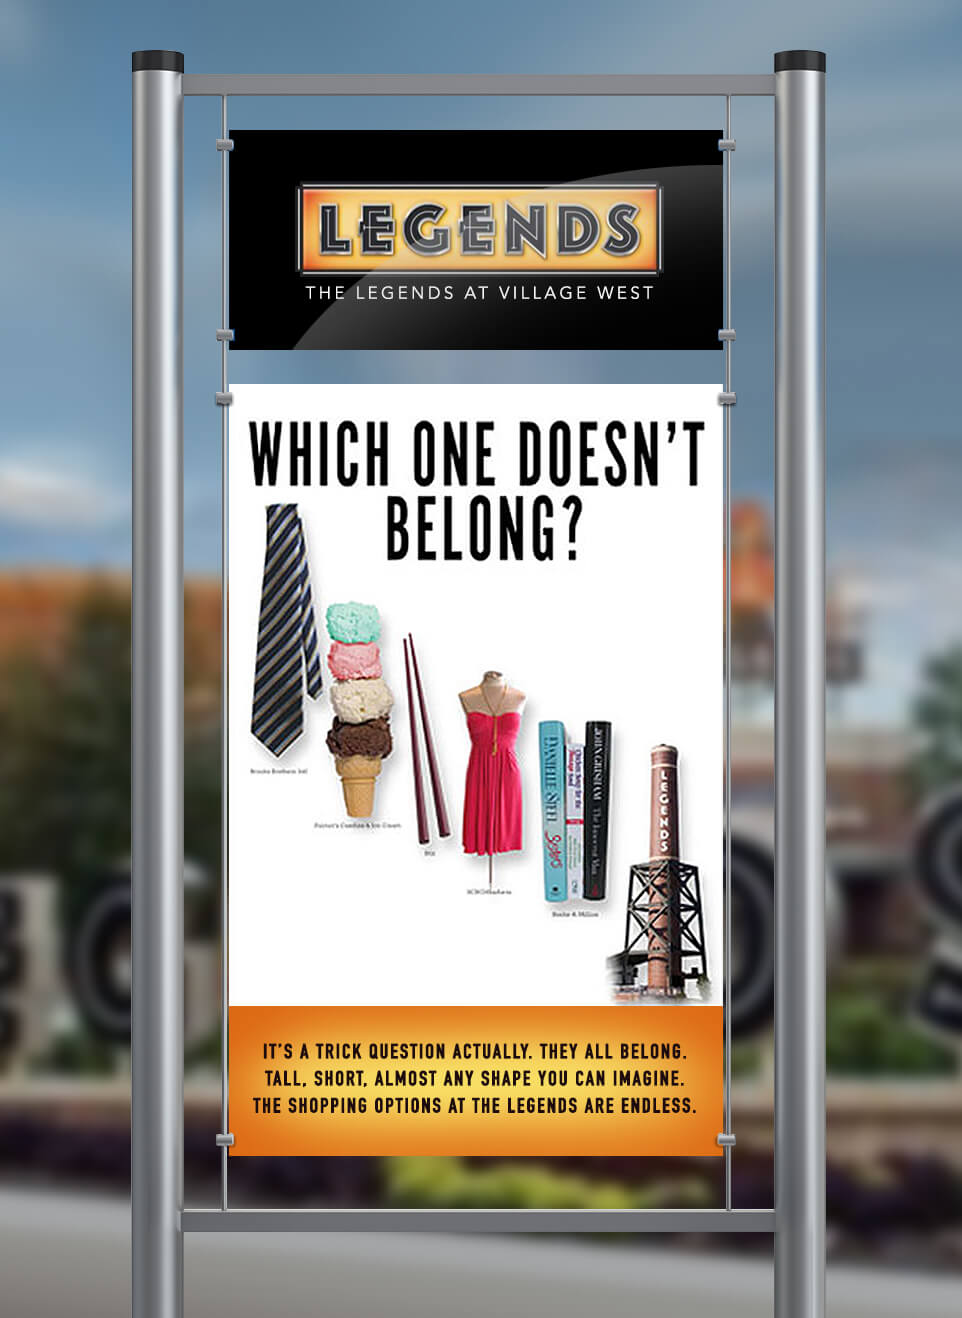 On-site poster #3 series created for The Legends at Village West.